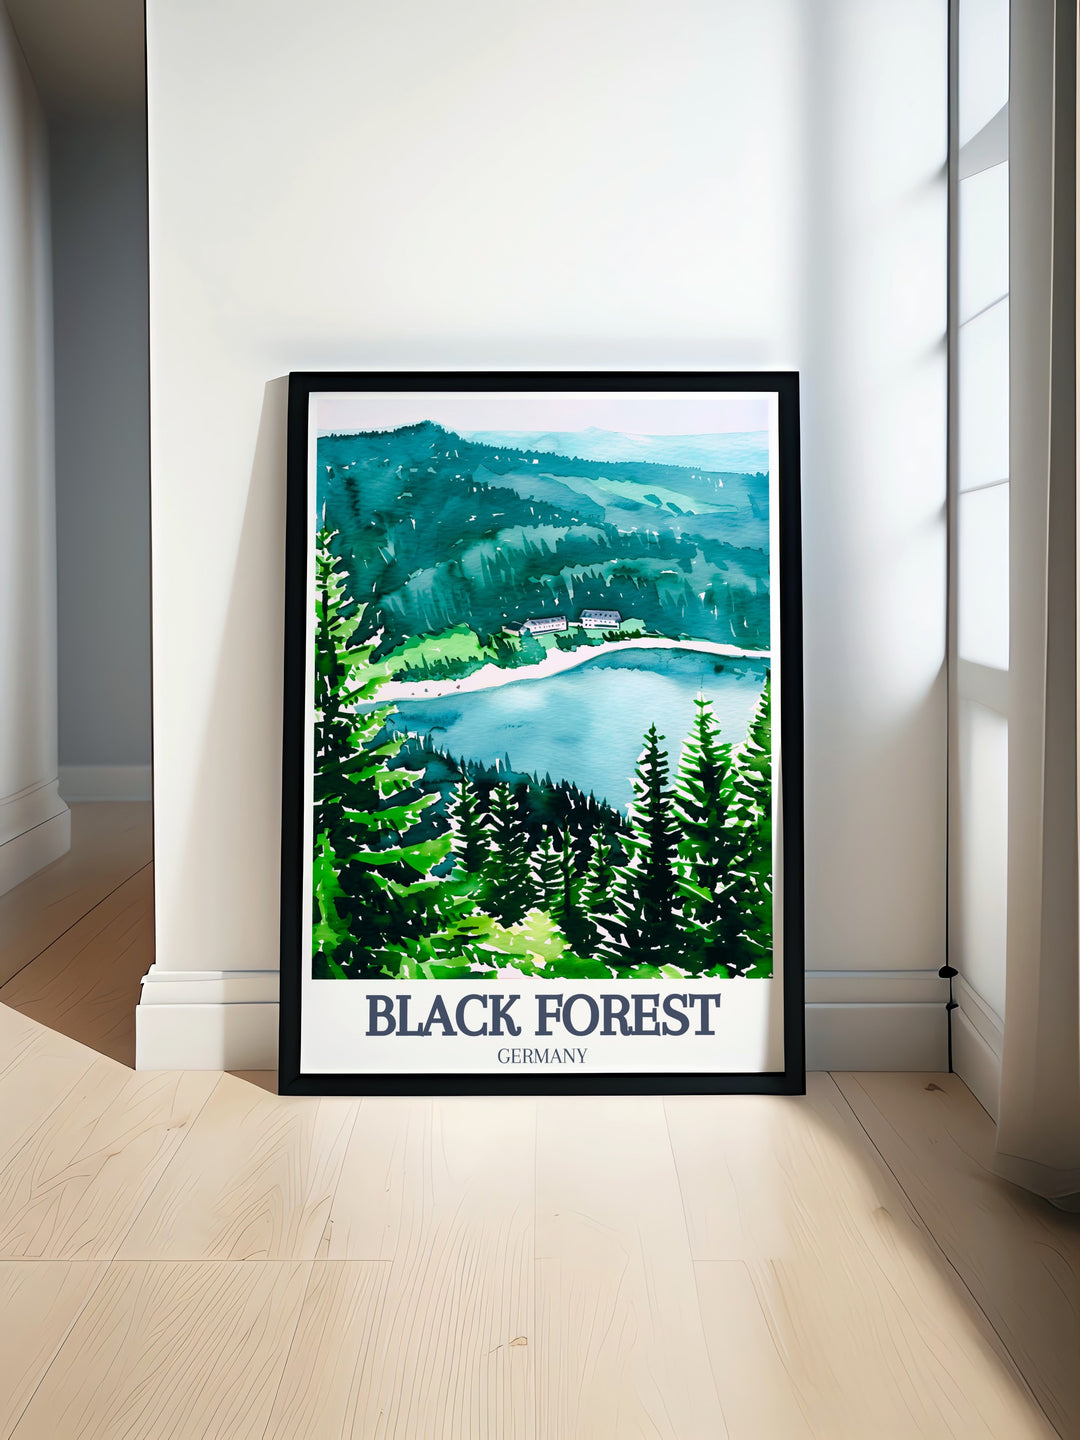 Mummelsee Lake, Triberg Waterfalls scenic view captured in a stunning Germany Forest Print featuring the enchanting Schwarzwald landscape perfect for Black Forest decor and nature inspired home decor an ideal gift for those who love German travel art and serene forest scenes